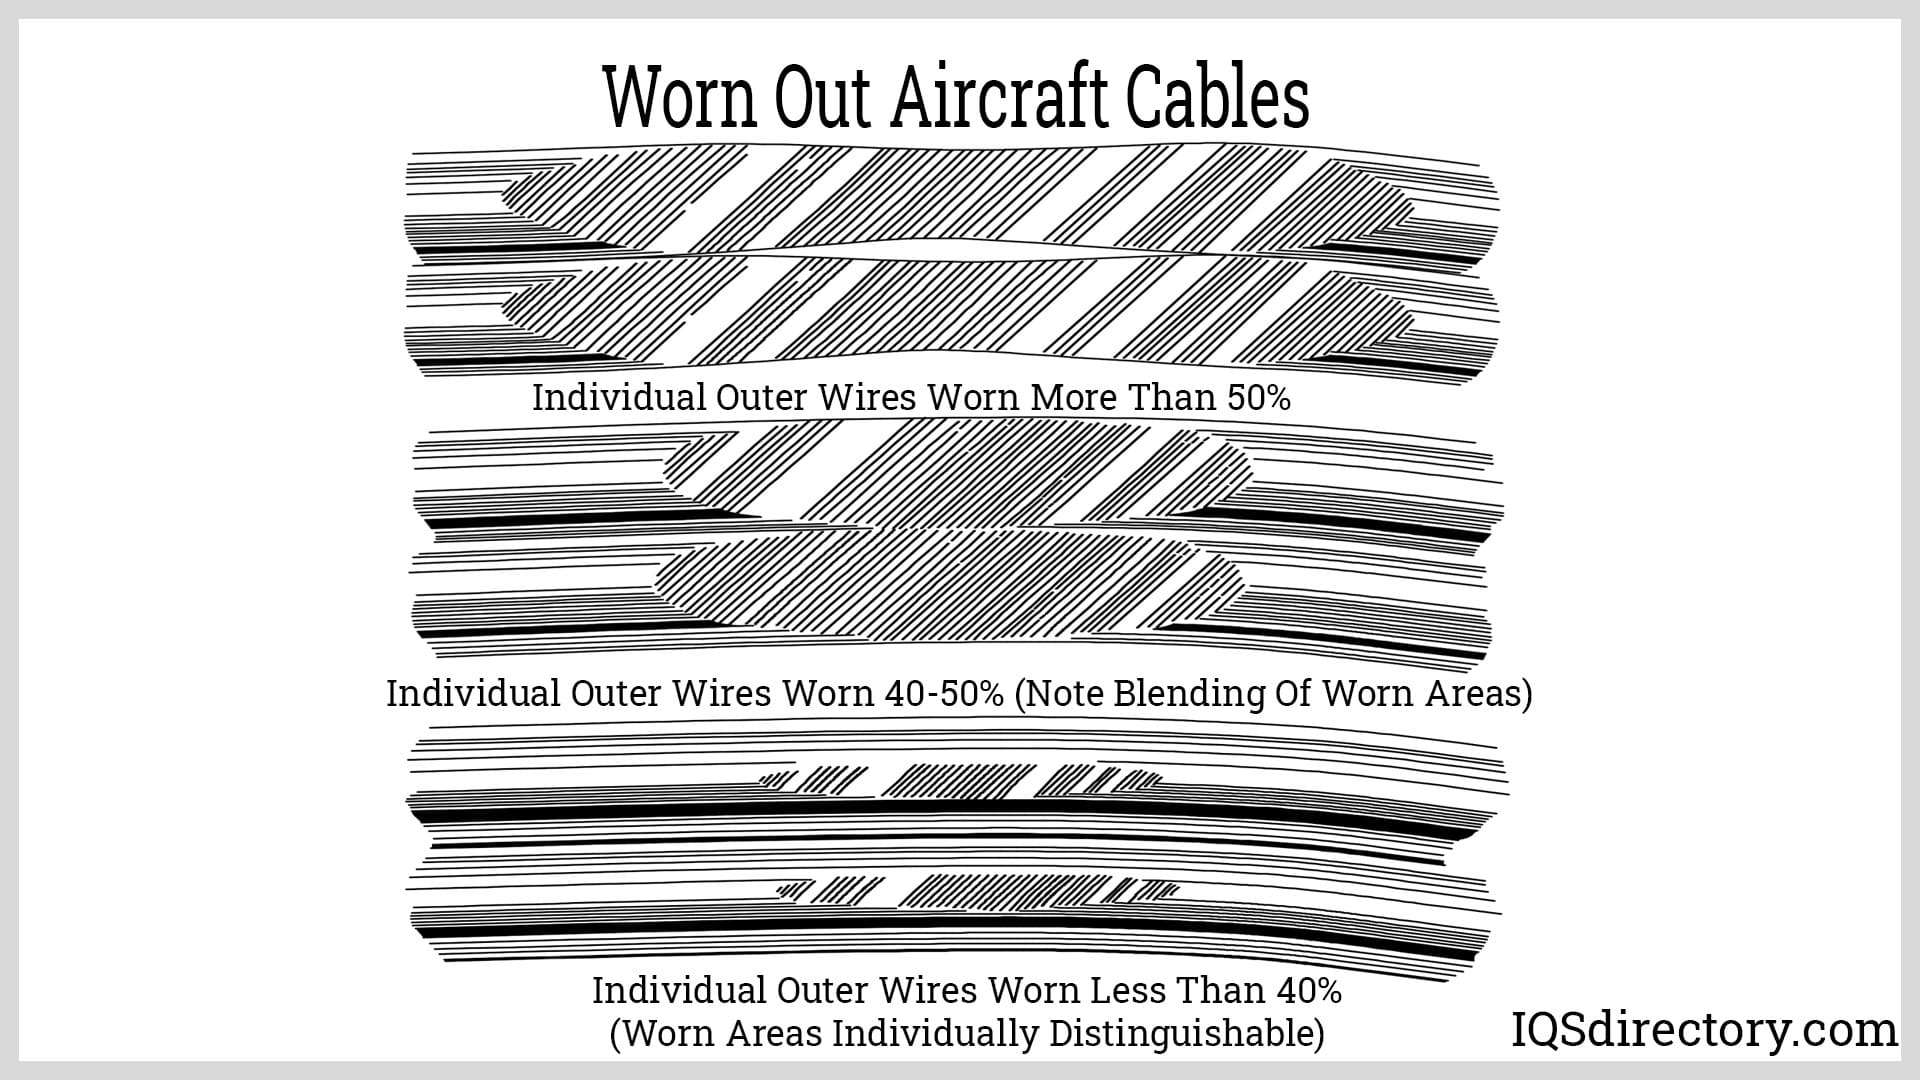 Worn Out Aircraft Cables